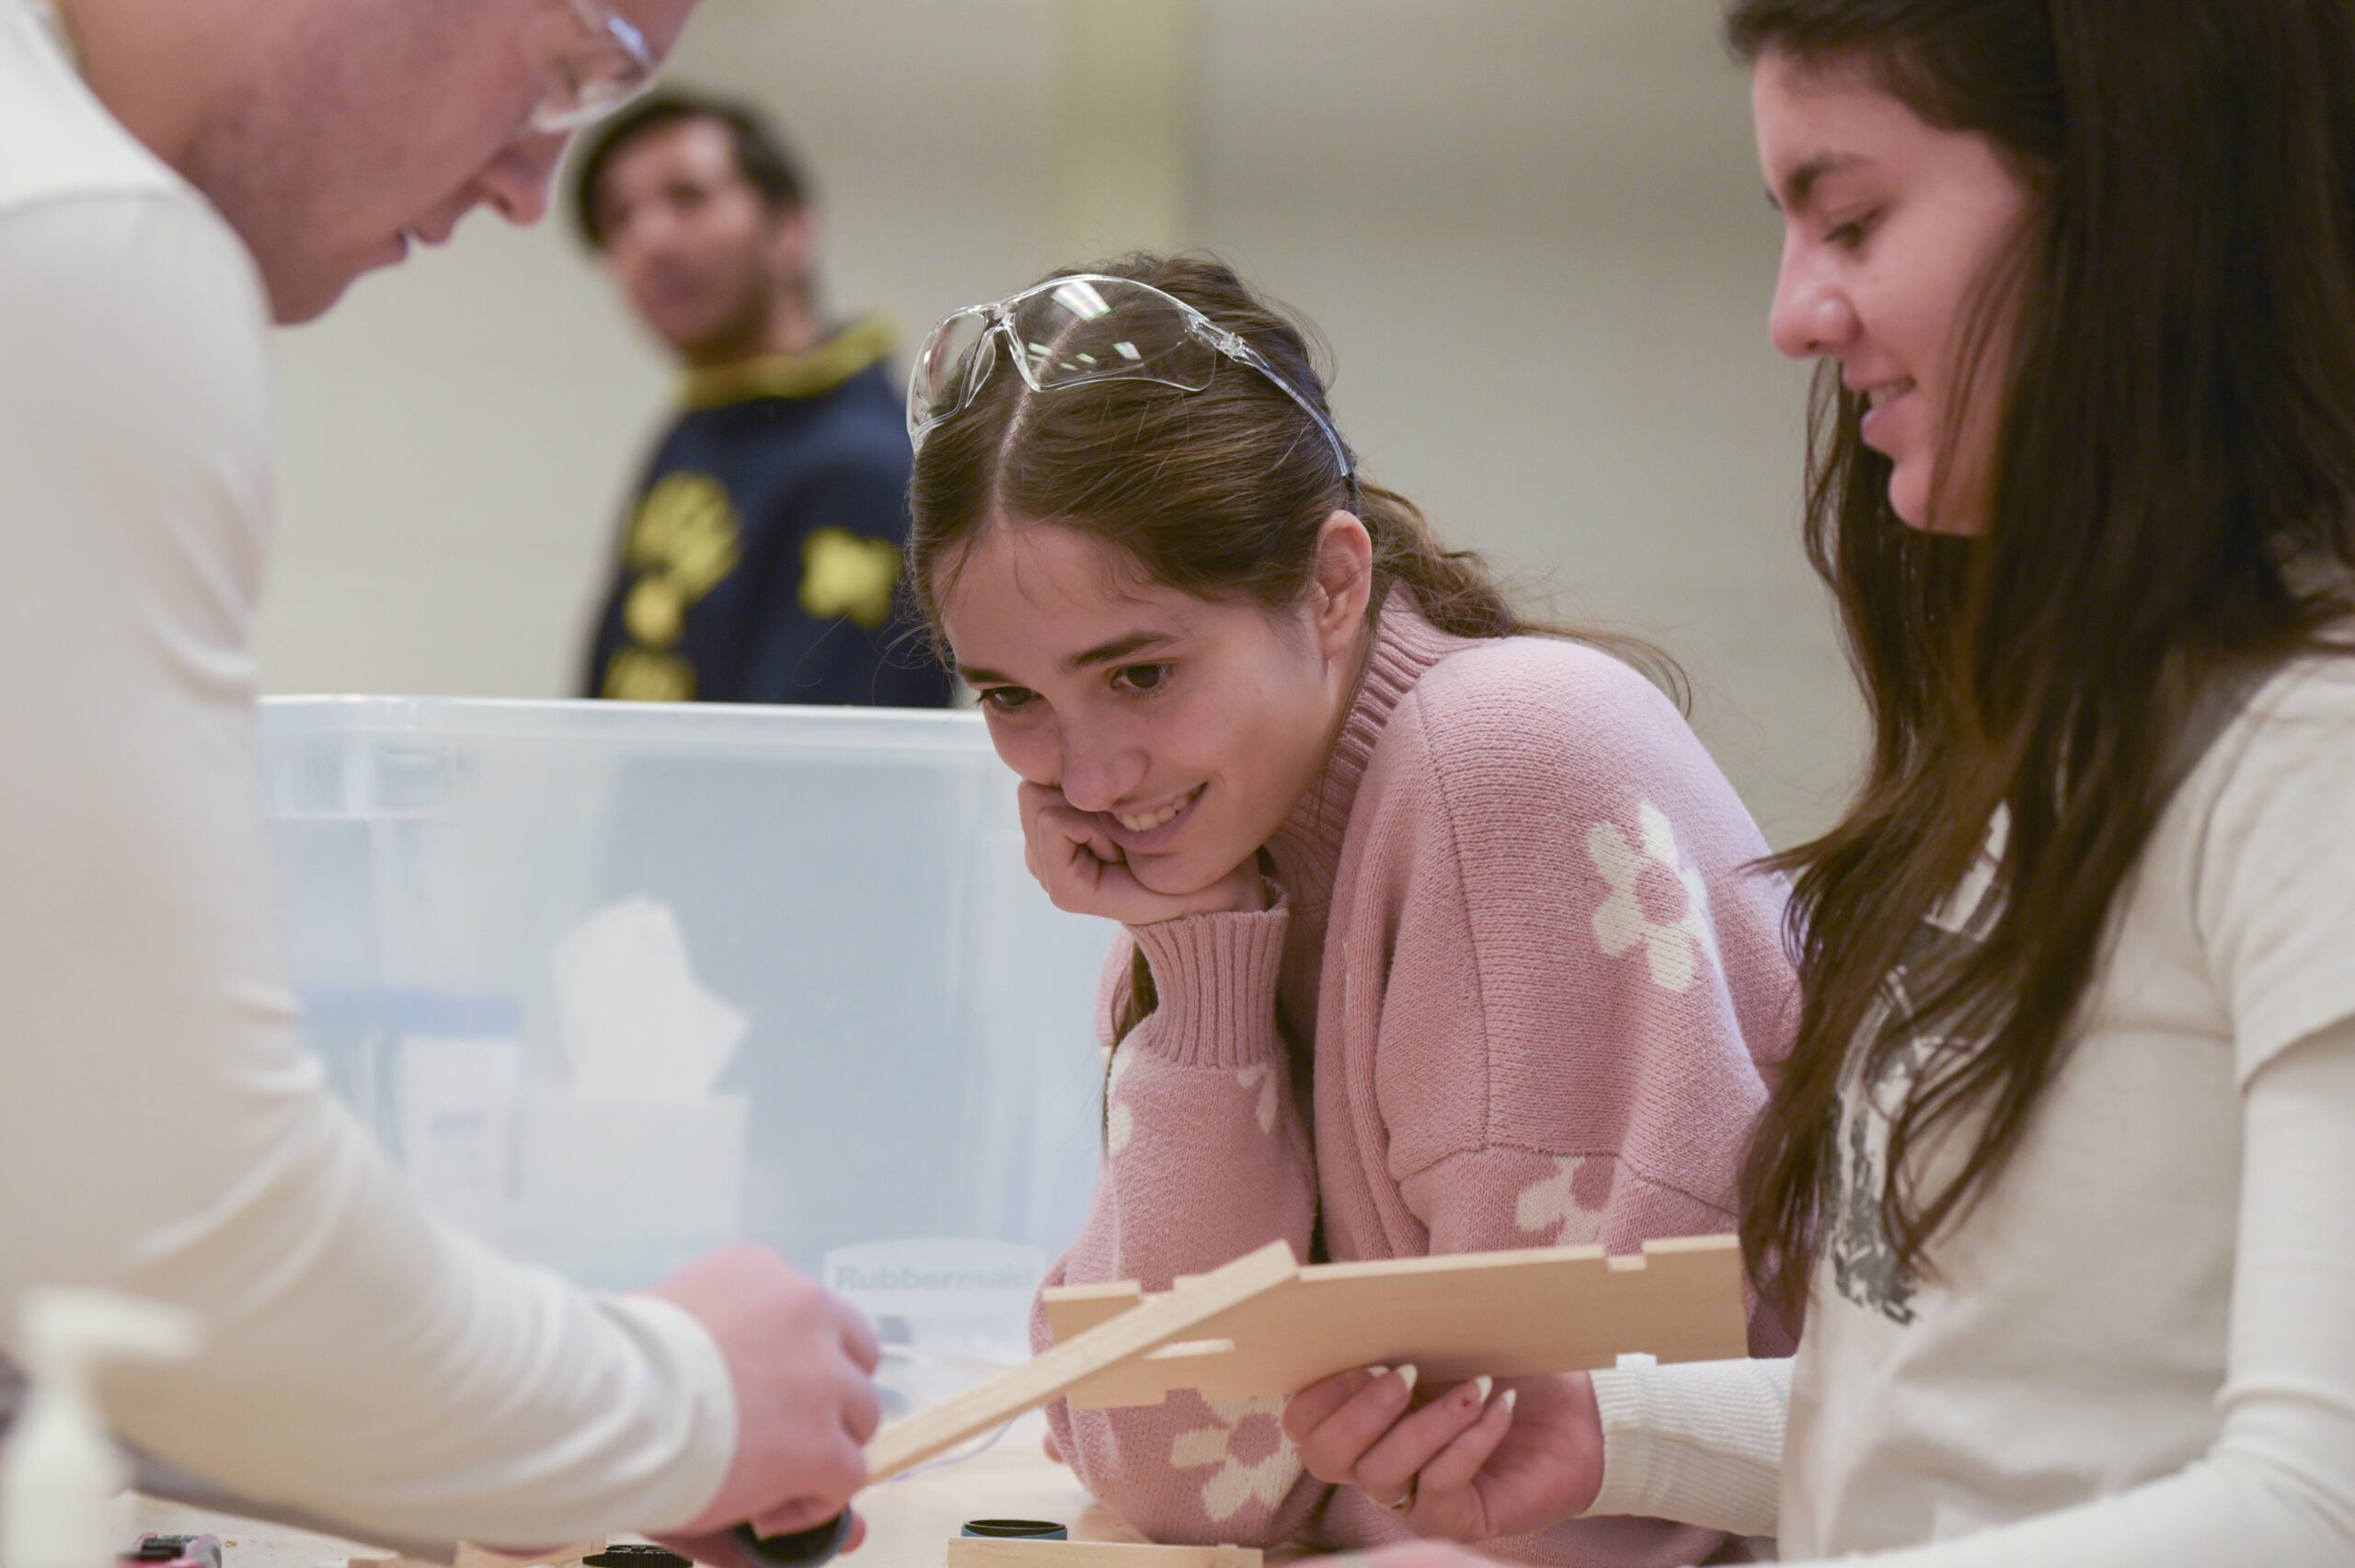 Student smiling at group members assembling wooden parts